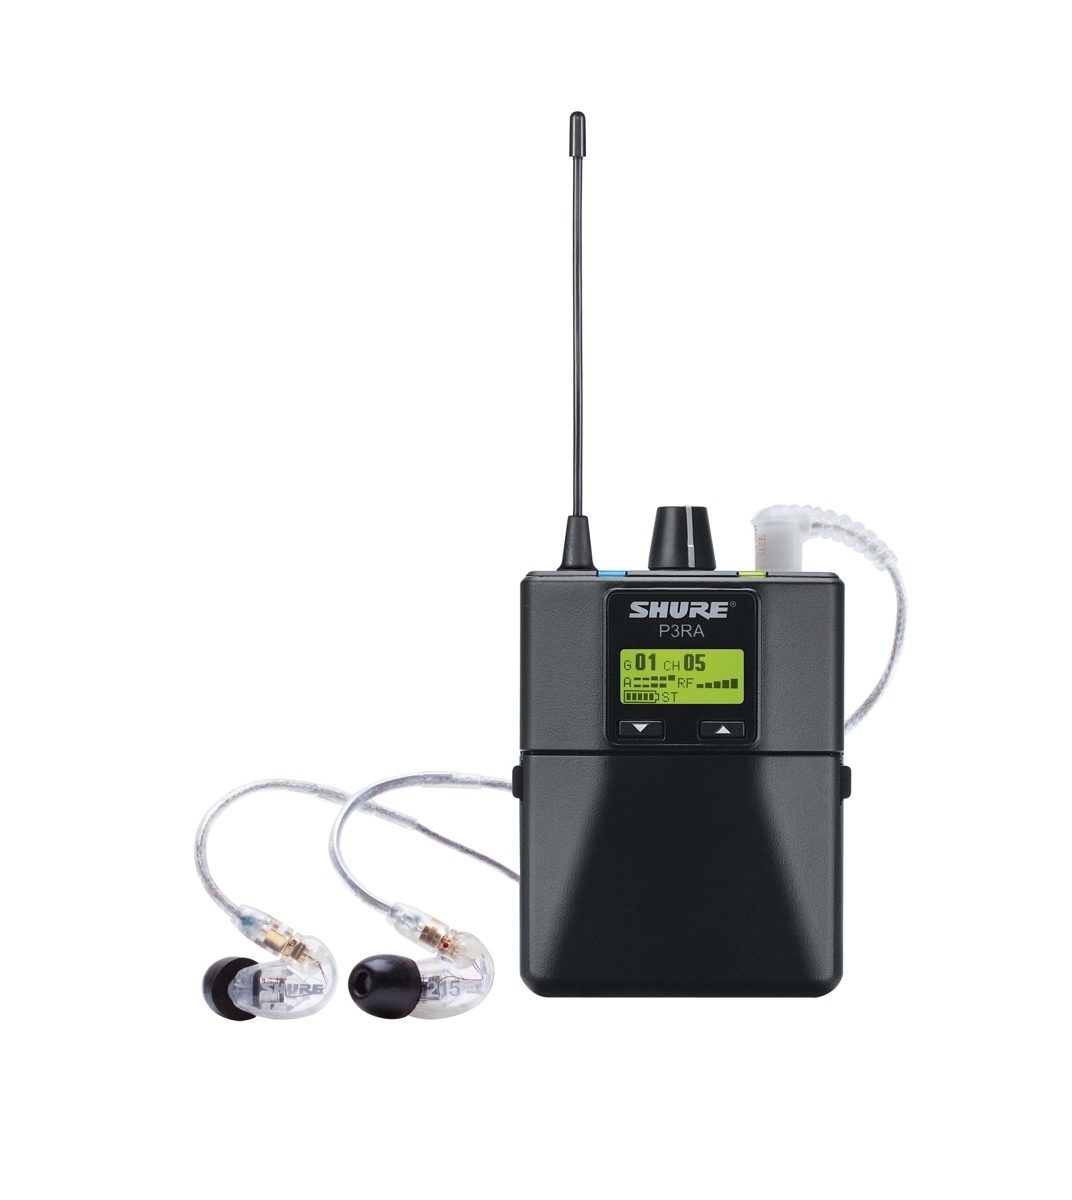 Shure PSM300 Wireless In-Ear Monitor System with SE215CL Earphones